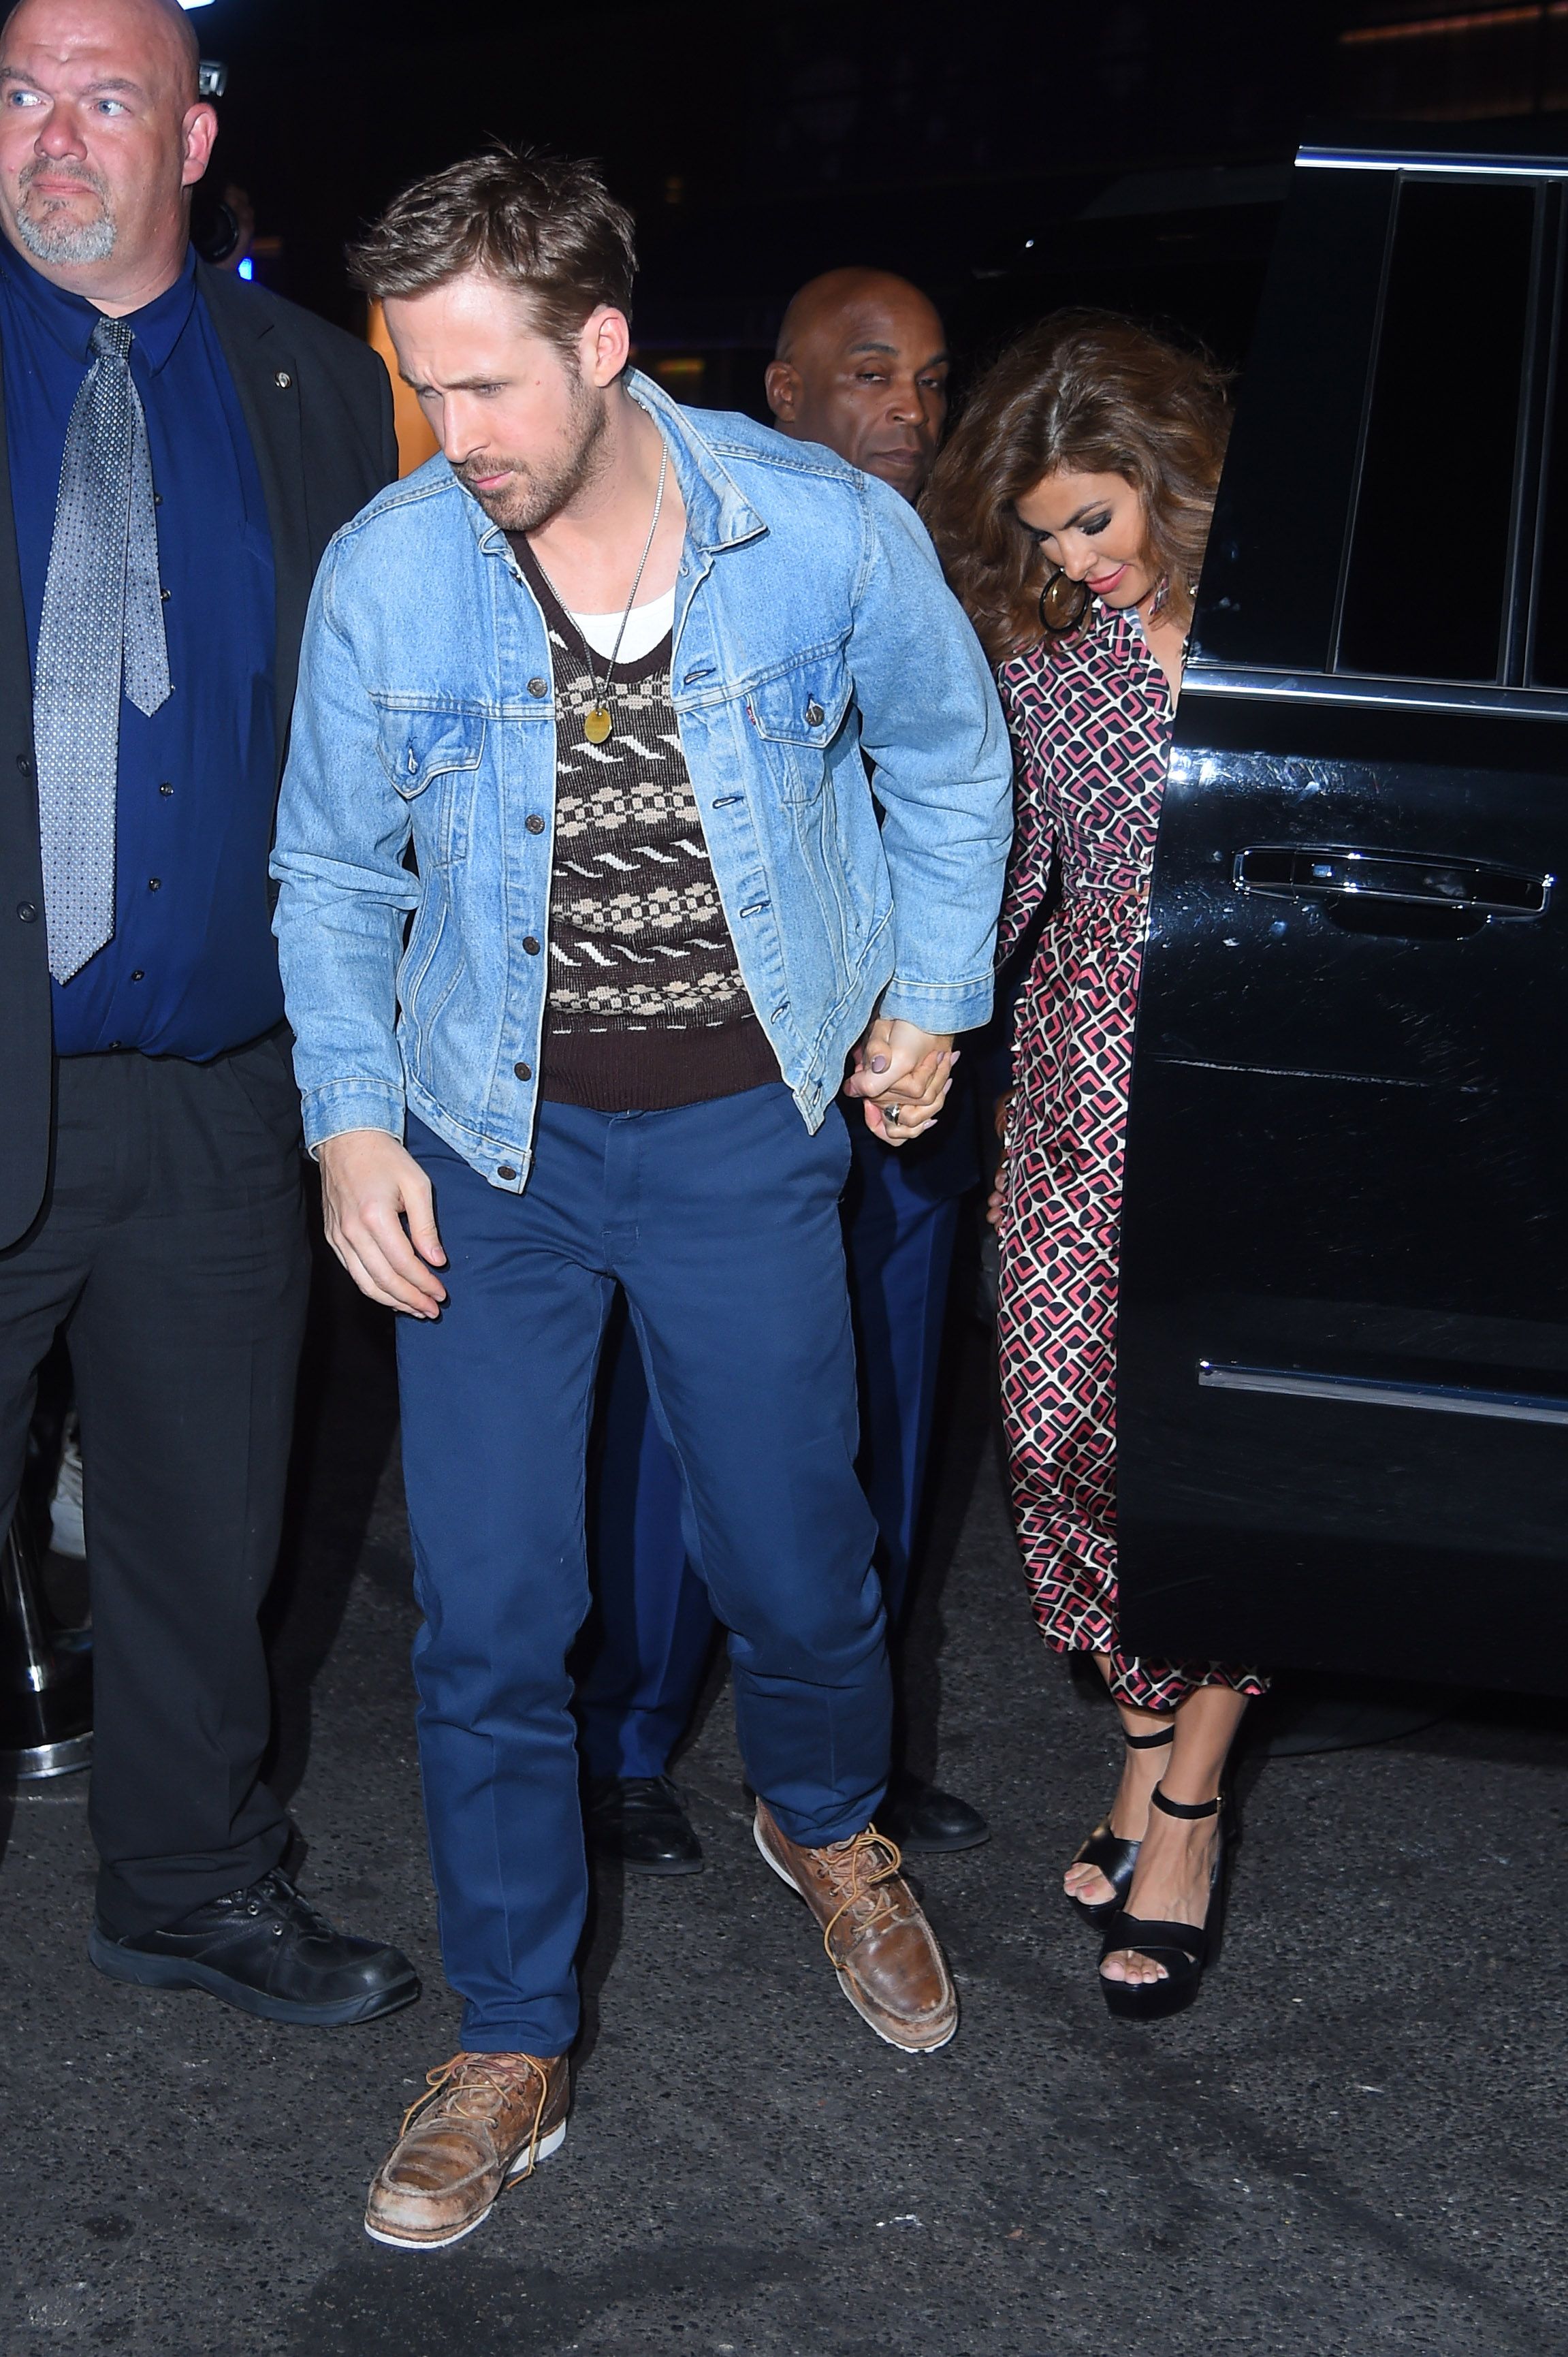 Paparazzi snap of Ryan Gosling and Eva Mendes at the SNL Premiere after party in 2017 in New York | Source: Getty Images